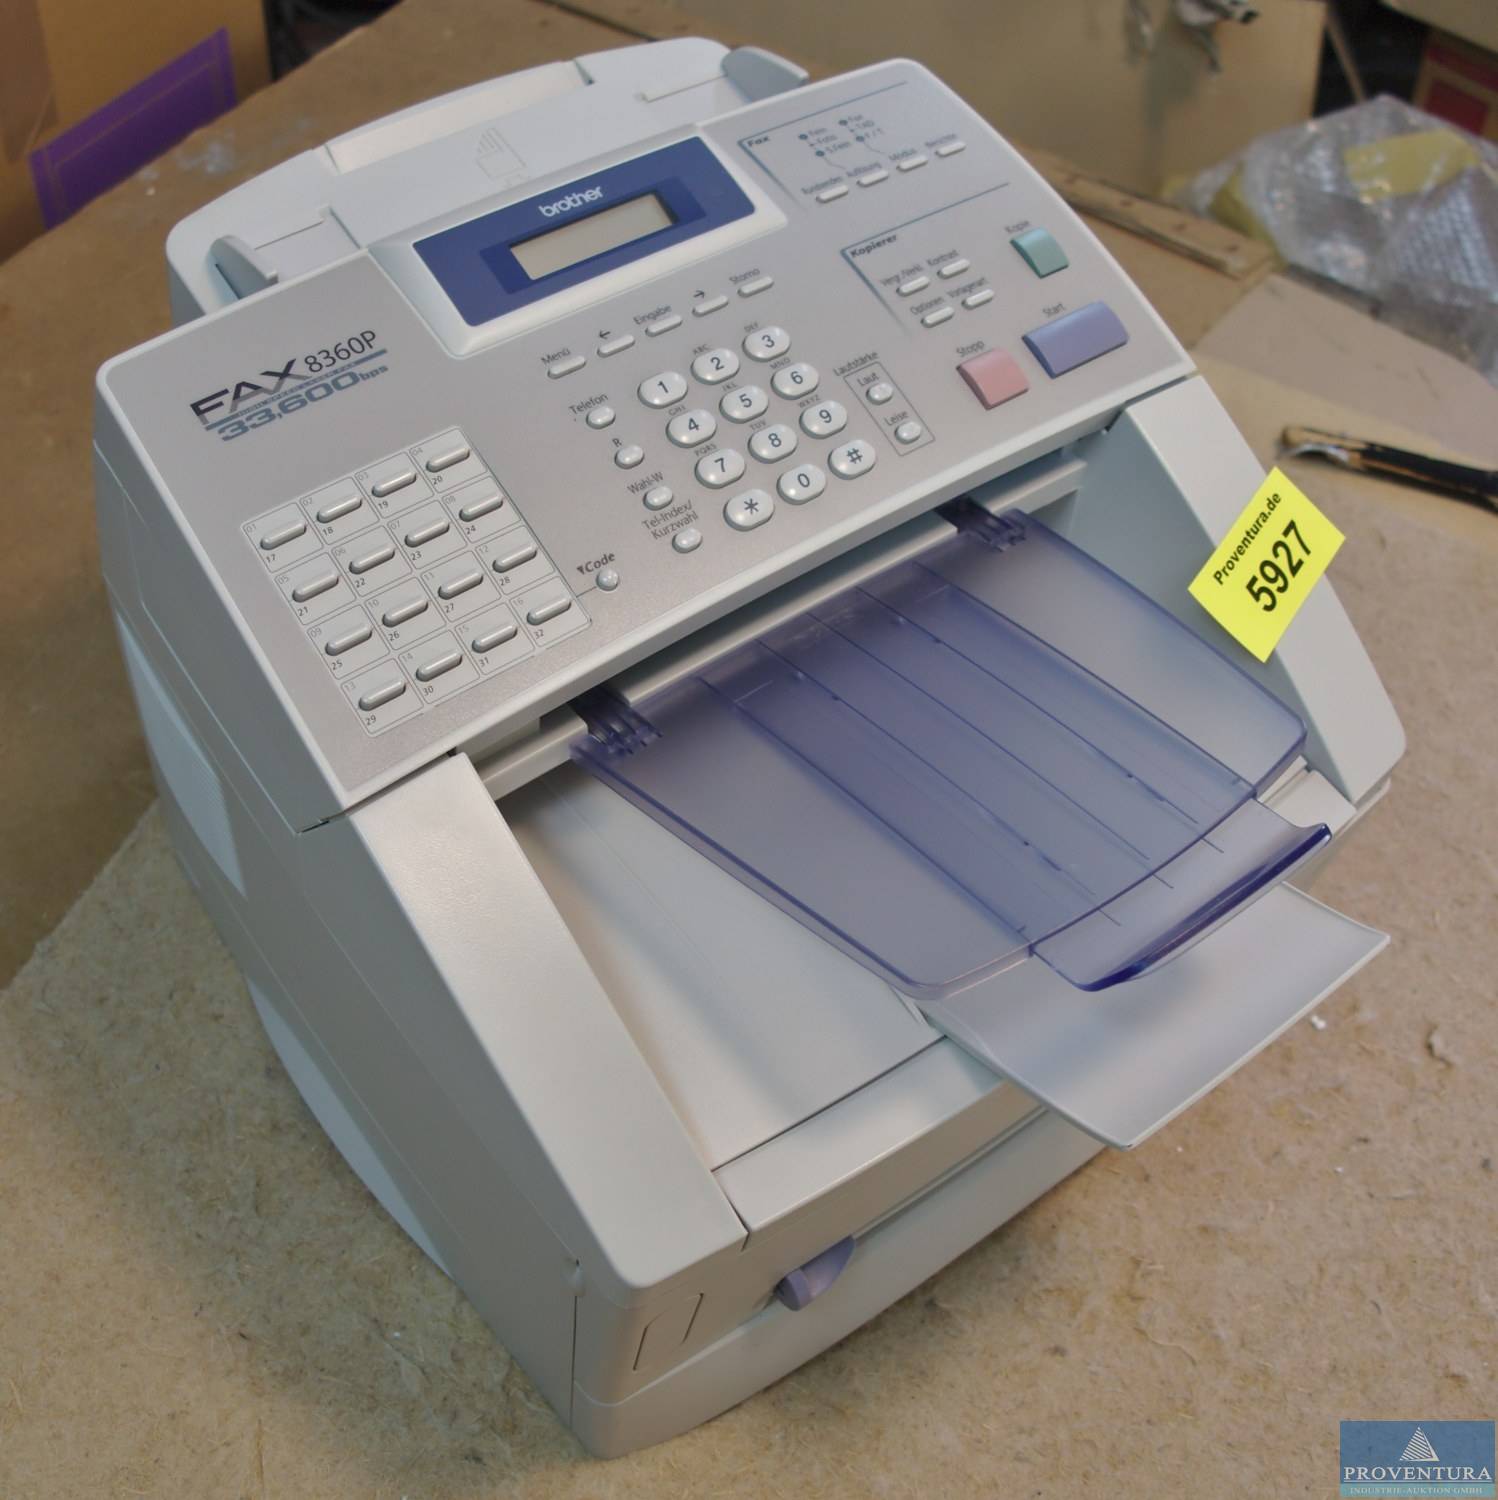 Laserfax BROTHER FAX8360P  Proventura OnlineAuktion